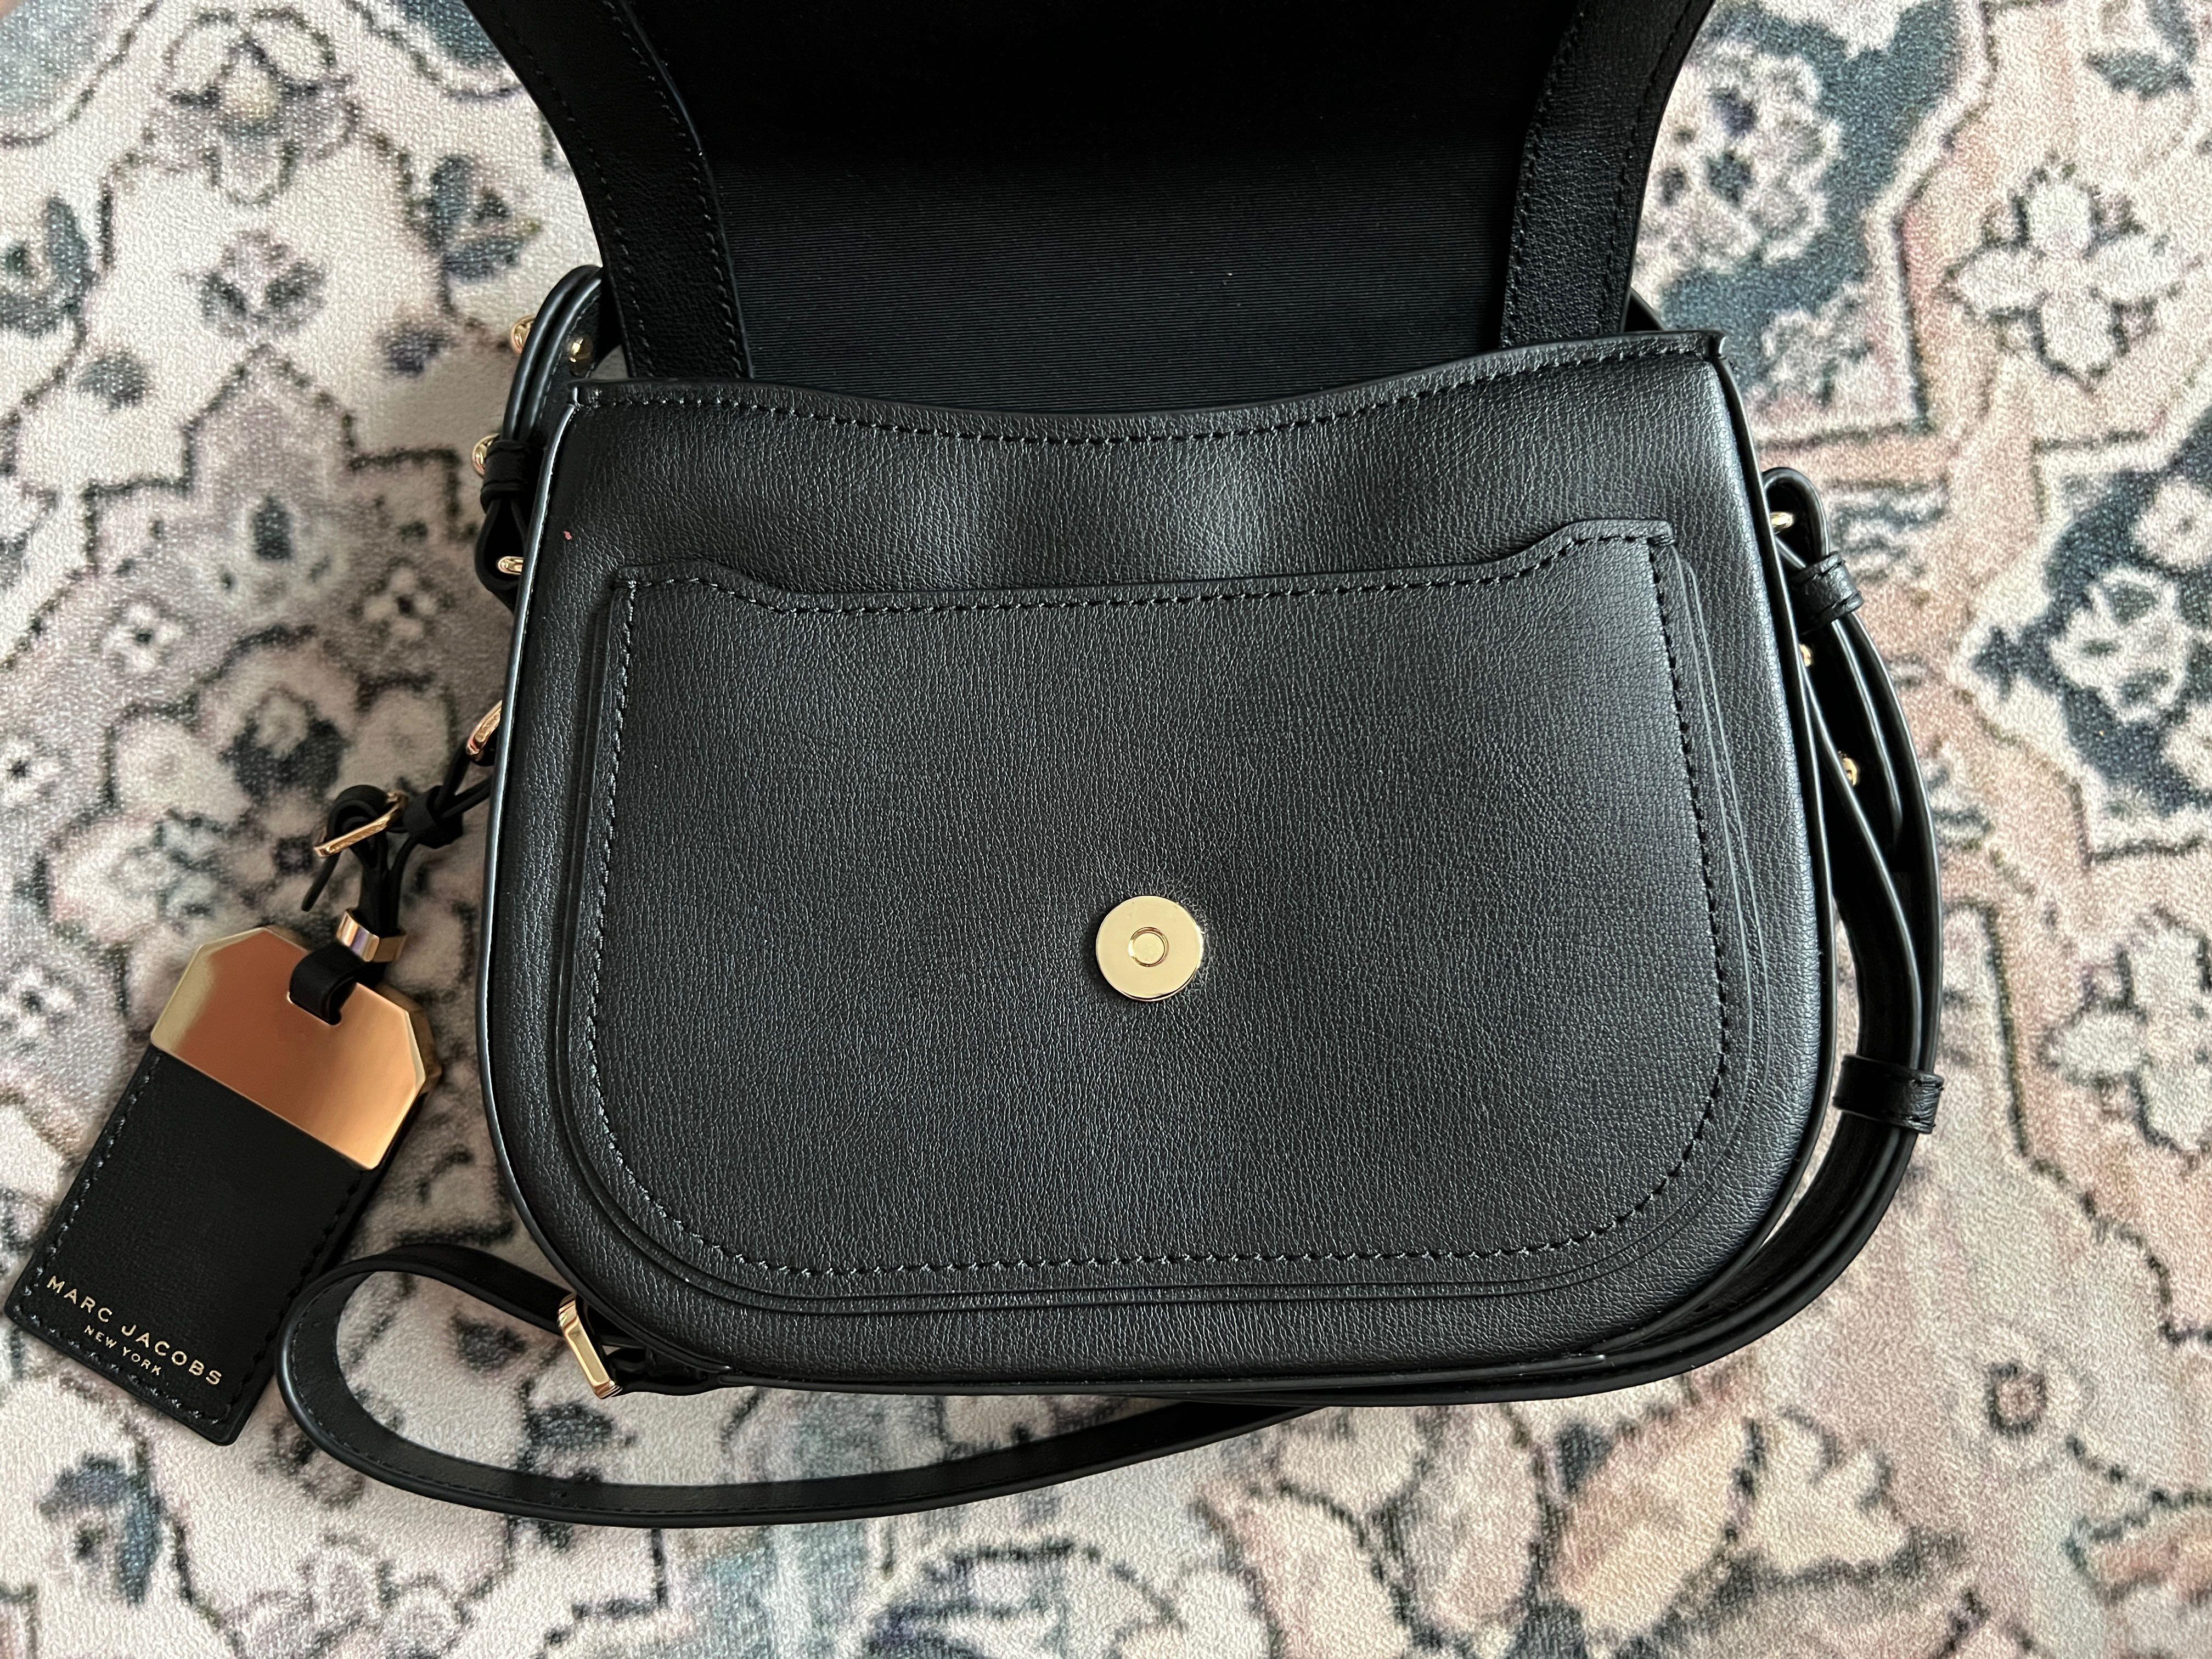 Marc Jacobs Rider Leather Crossbody Bag in Black